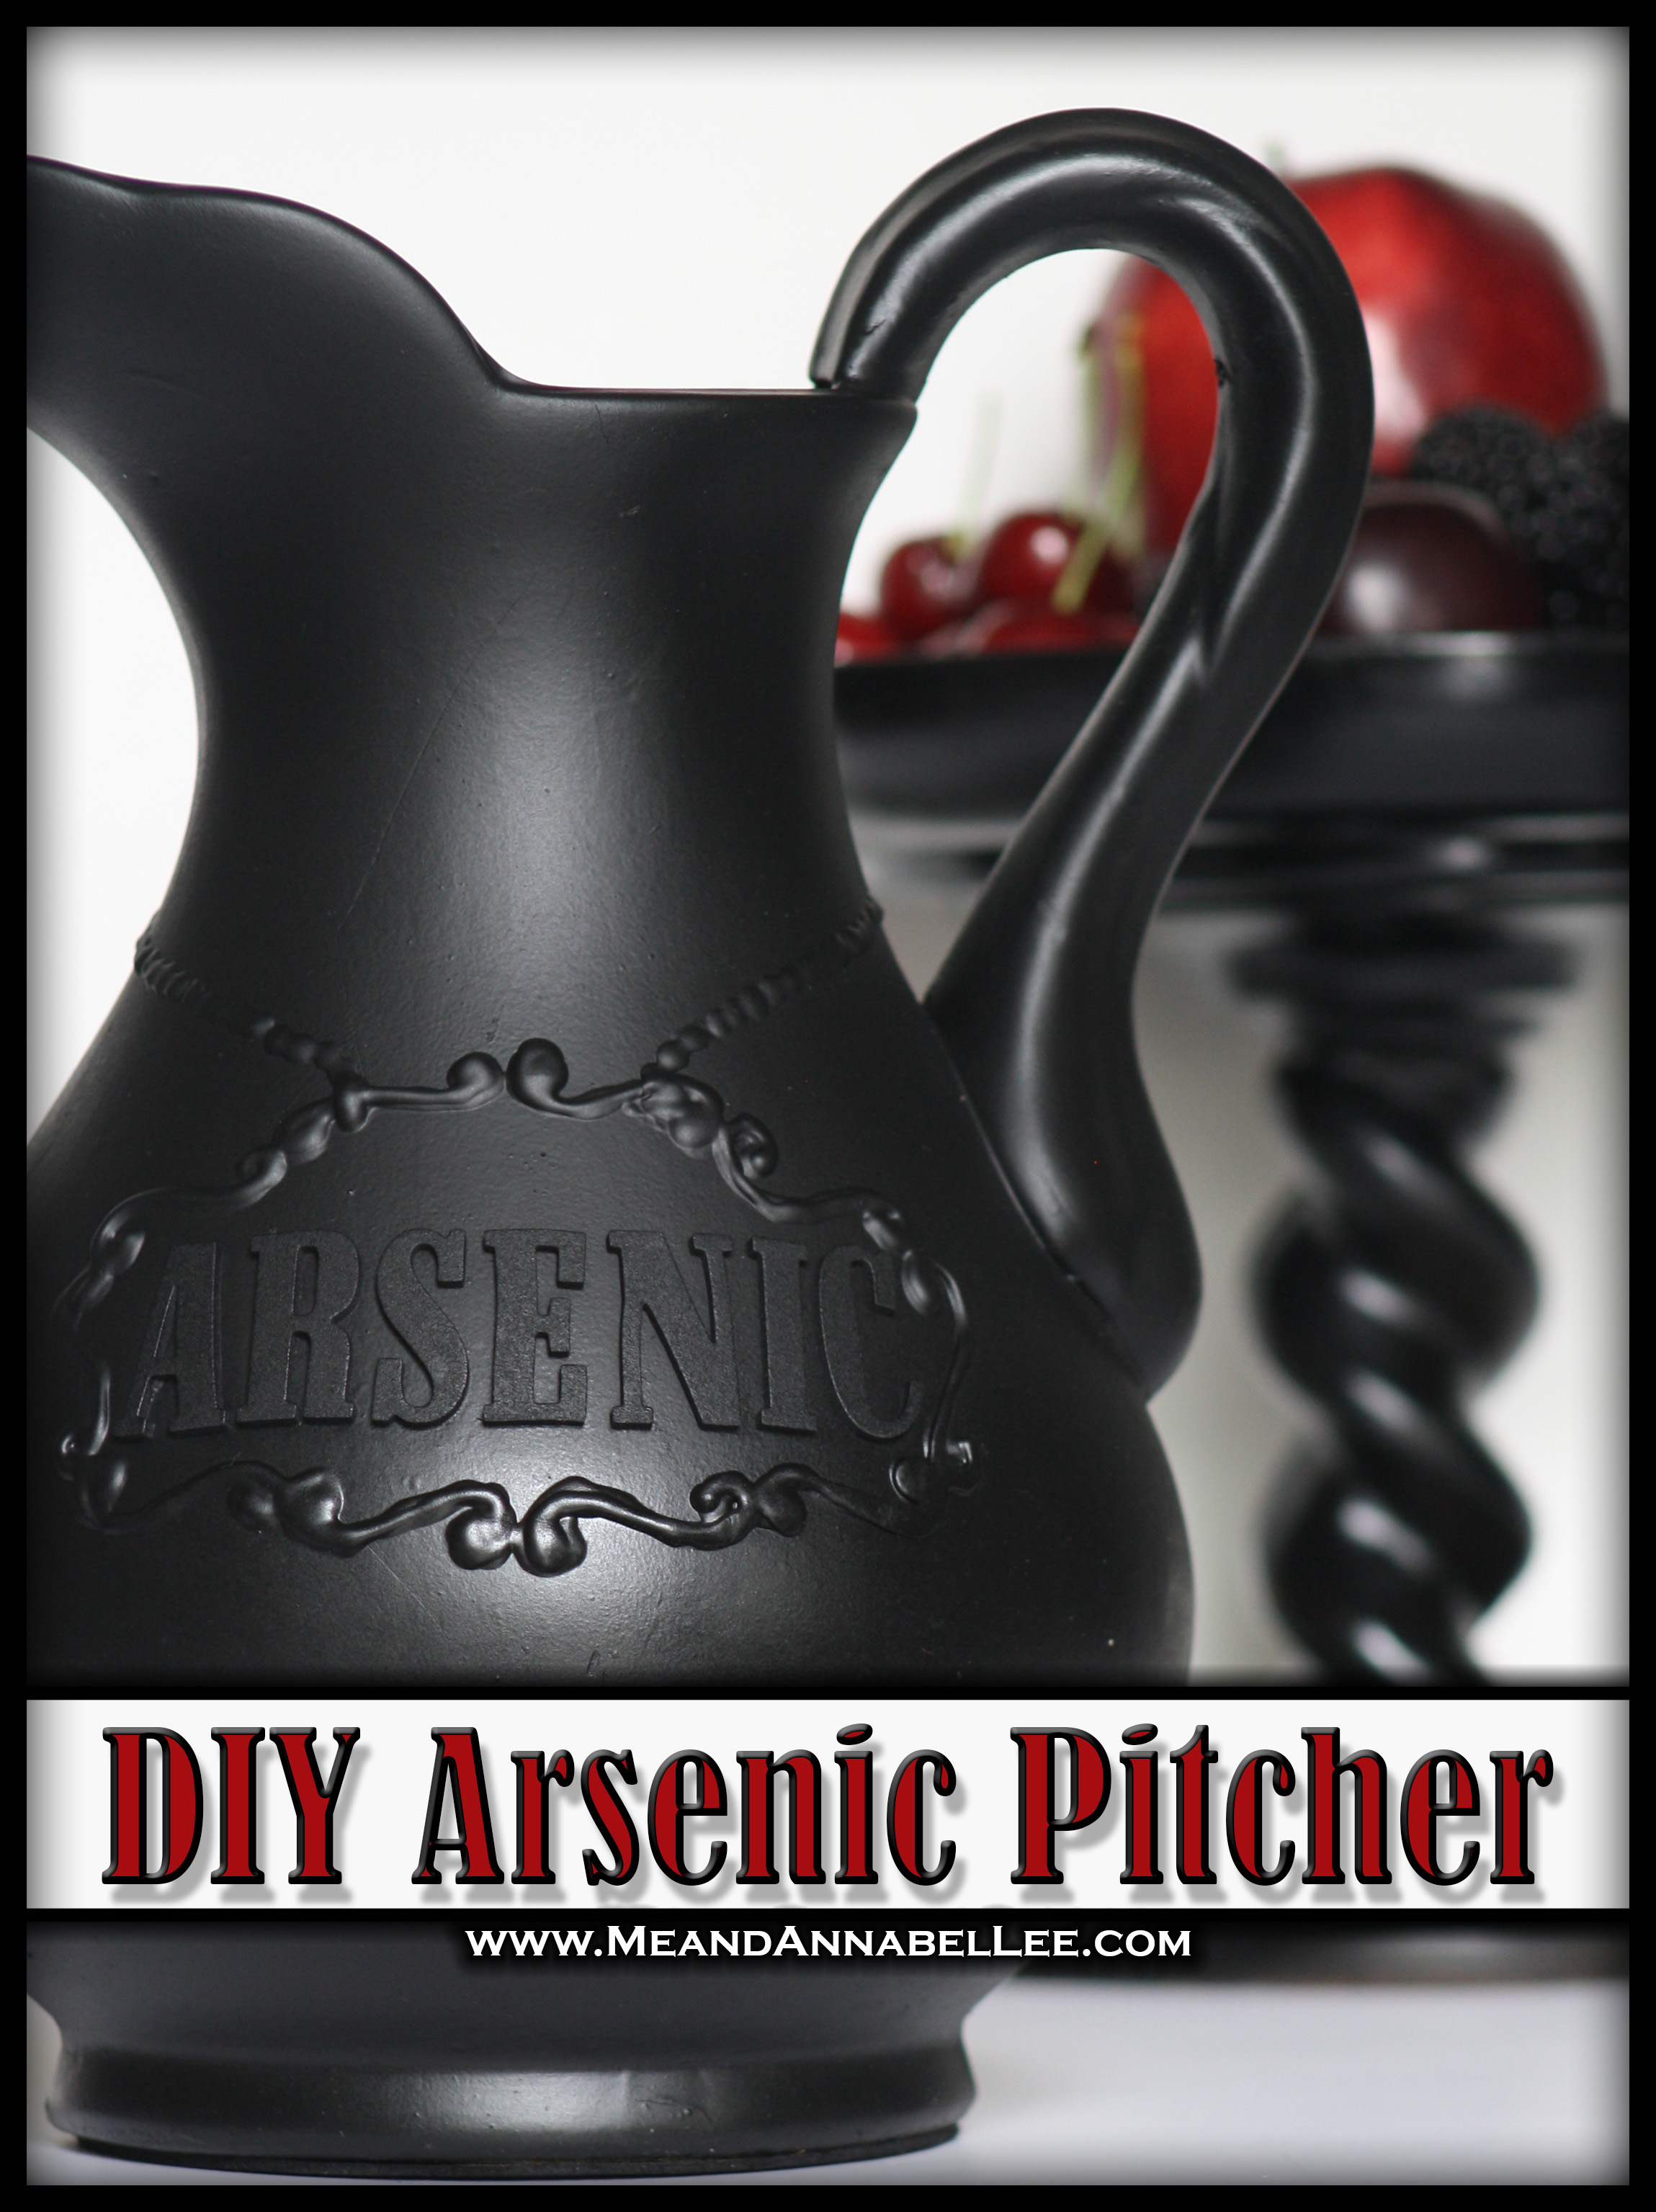 DIY Arsenic Drink Pitcher | Goth It Yourself | Poison | How to use Dimensional Paint Writer | Gothic Blog Post | www.MeandAnnabelLee.com - Blog for all things Dark, Gothic, Victorian, & Unusual